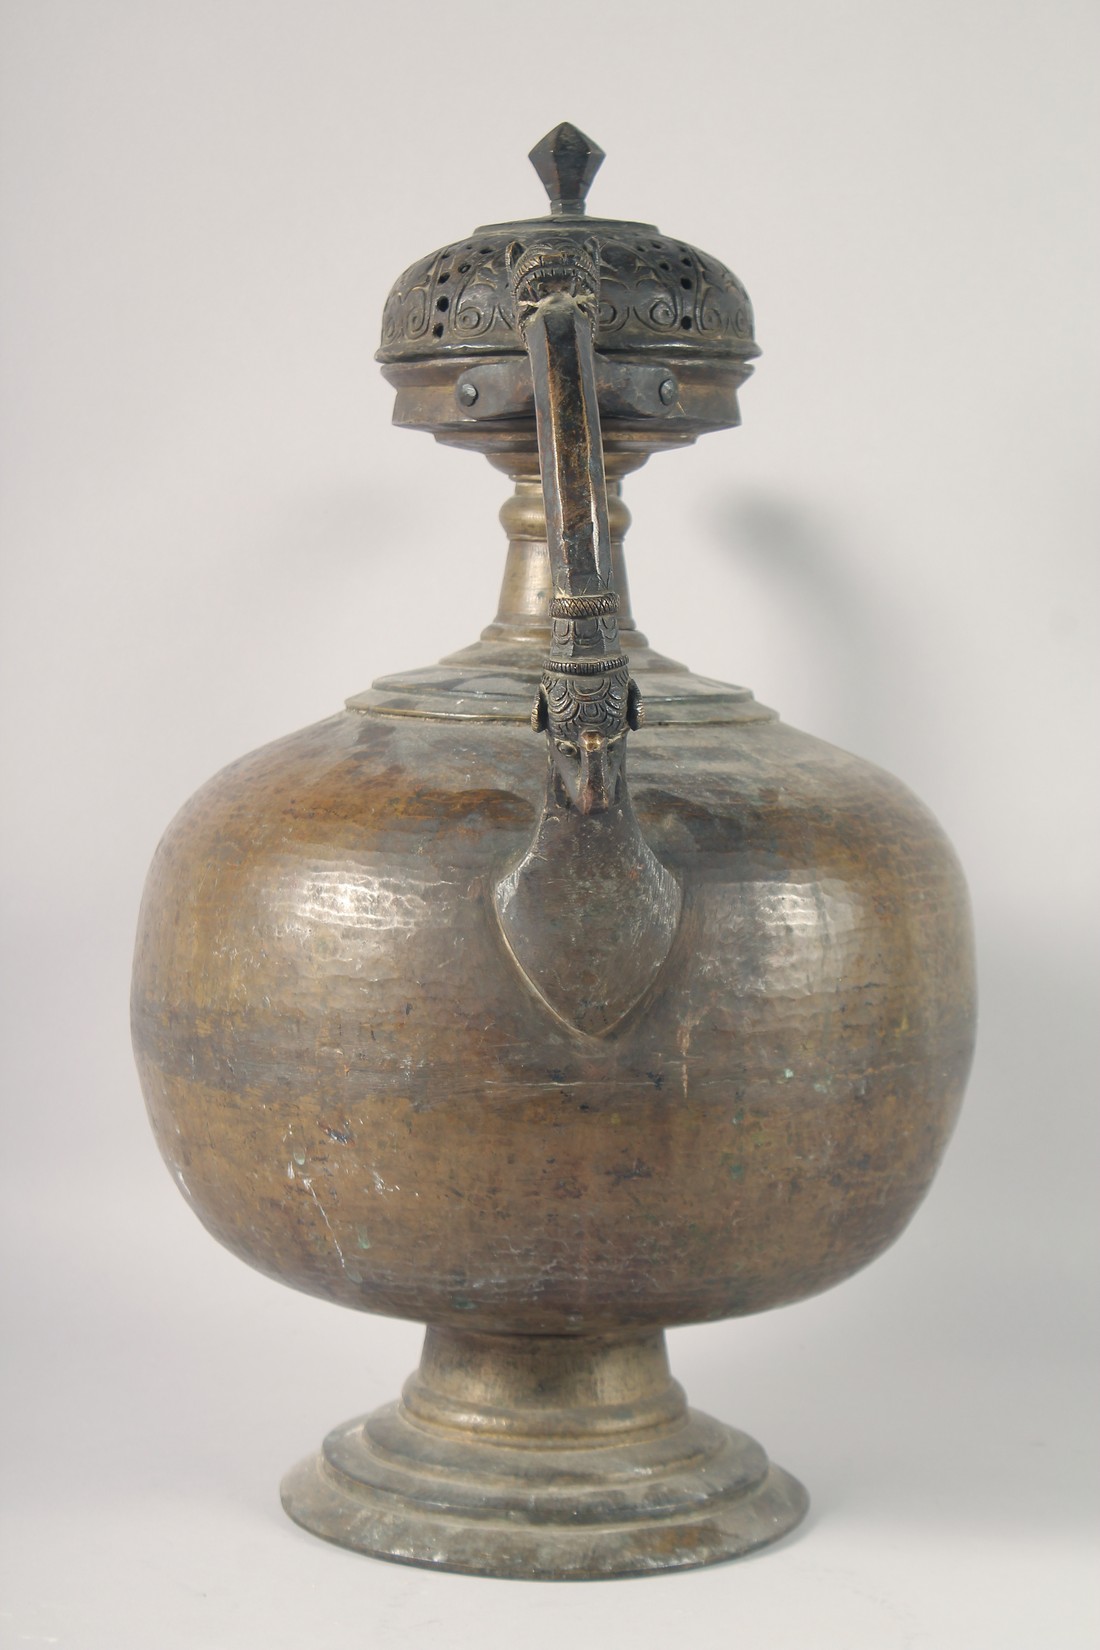 A LARGE 17TH CENTURY INDIAN BRONZE EWER, with zoomorphic handle and spout, 55cm high. - Image 4 of 9